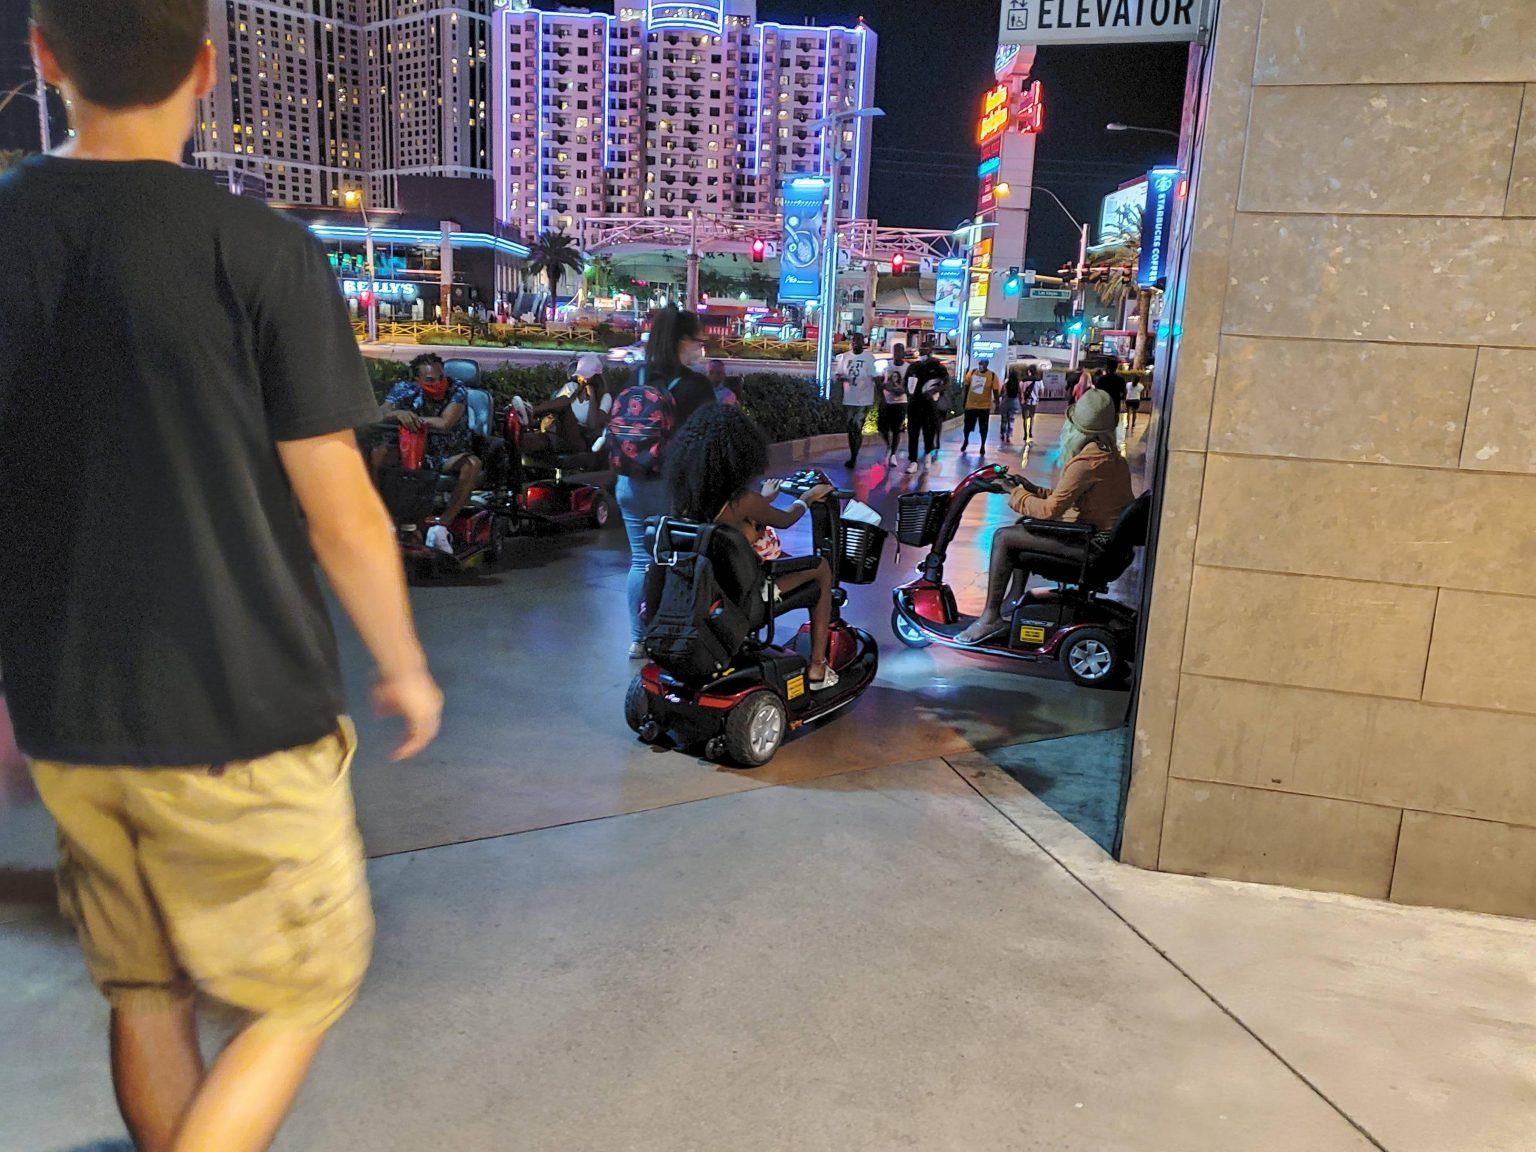 encore casino for scooters for handicapped